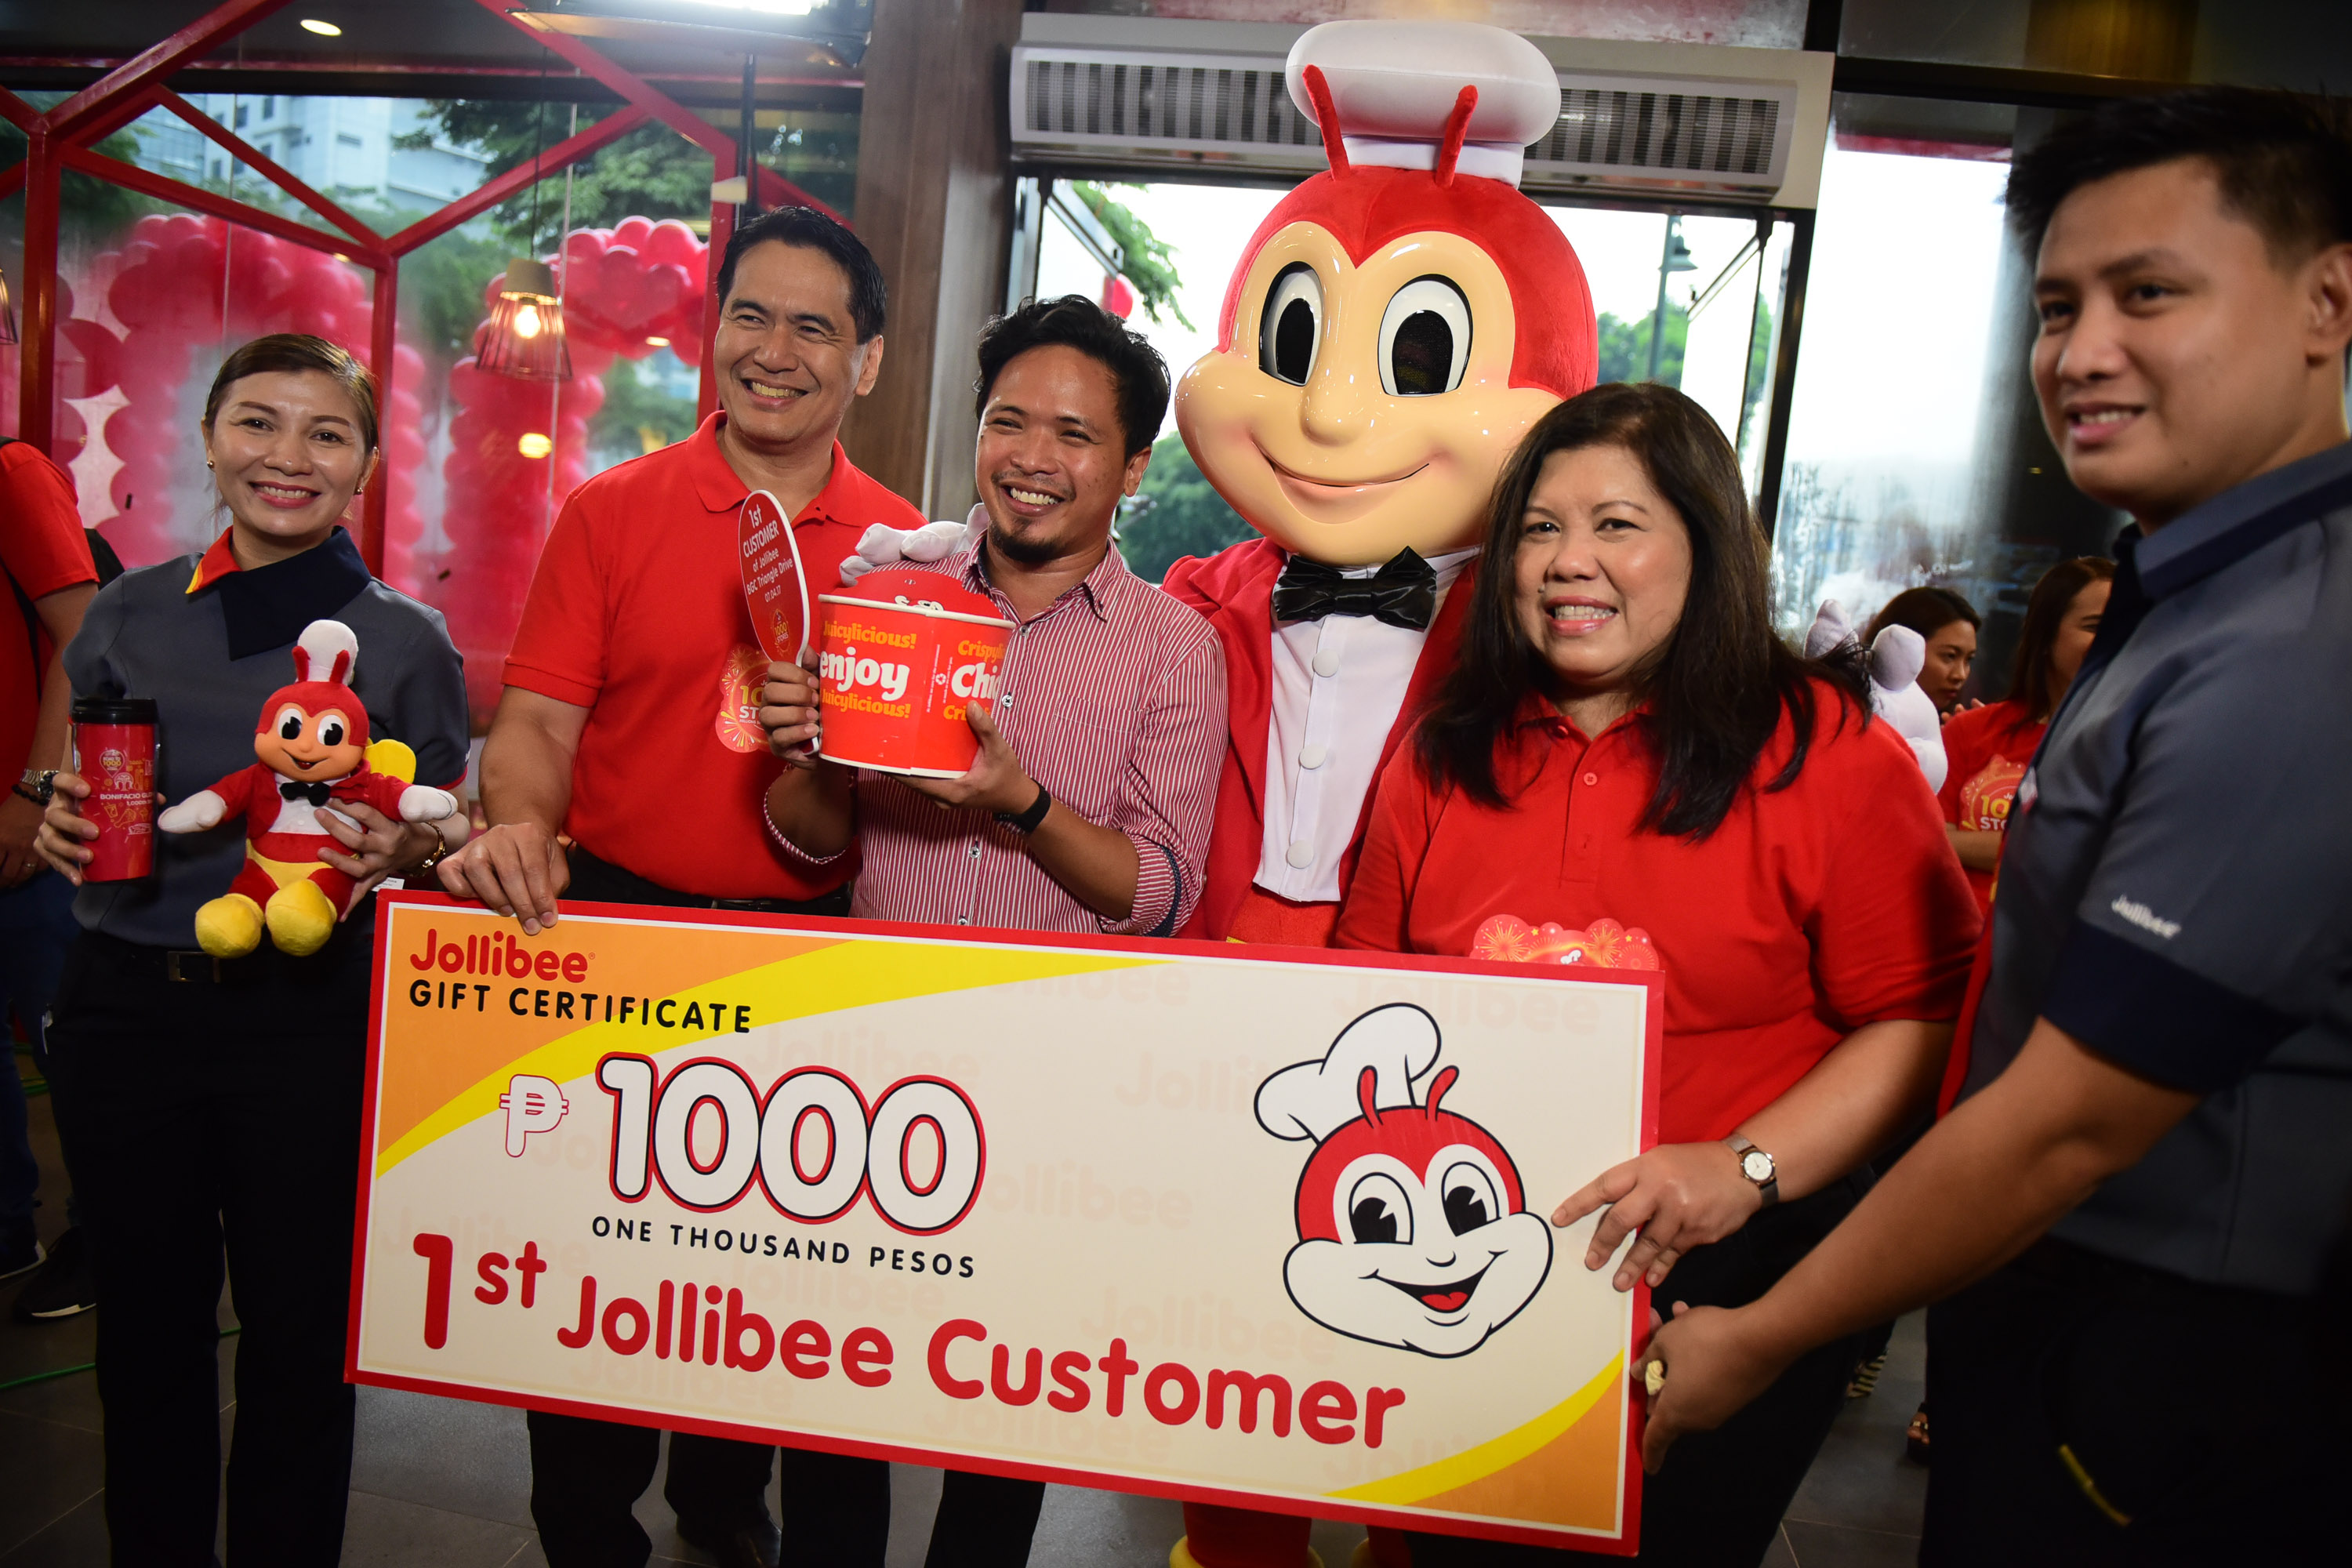 IN PHOTOS: Jollibee opens its 1,000th store